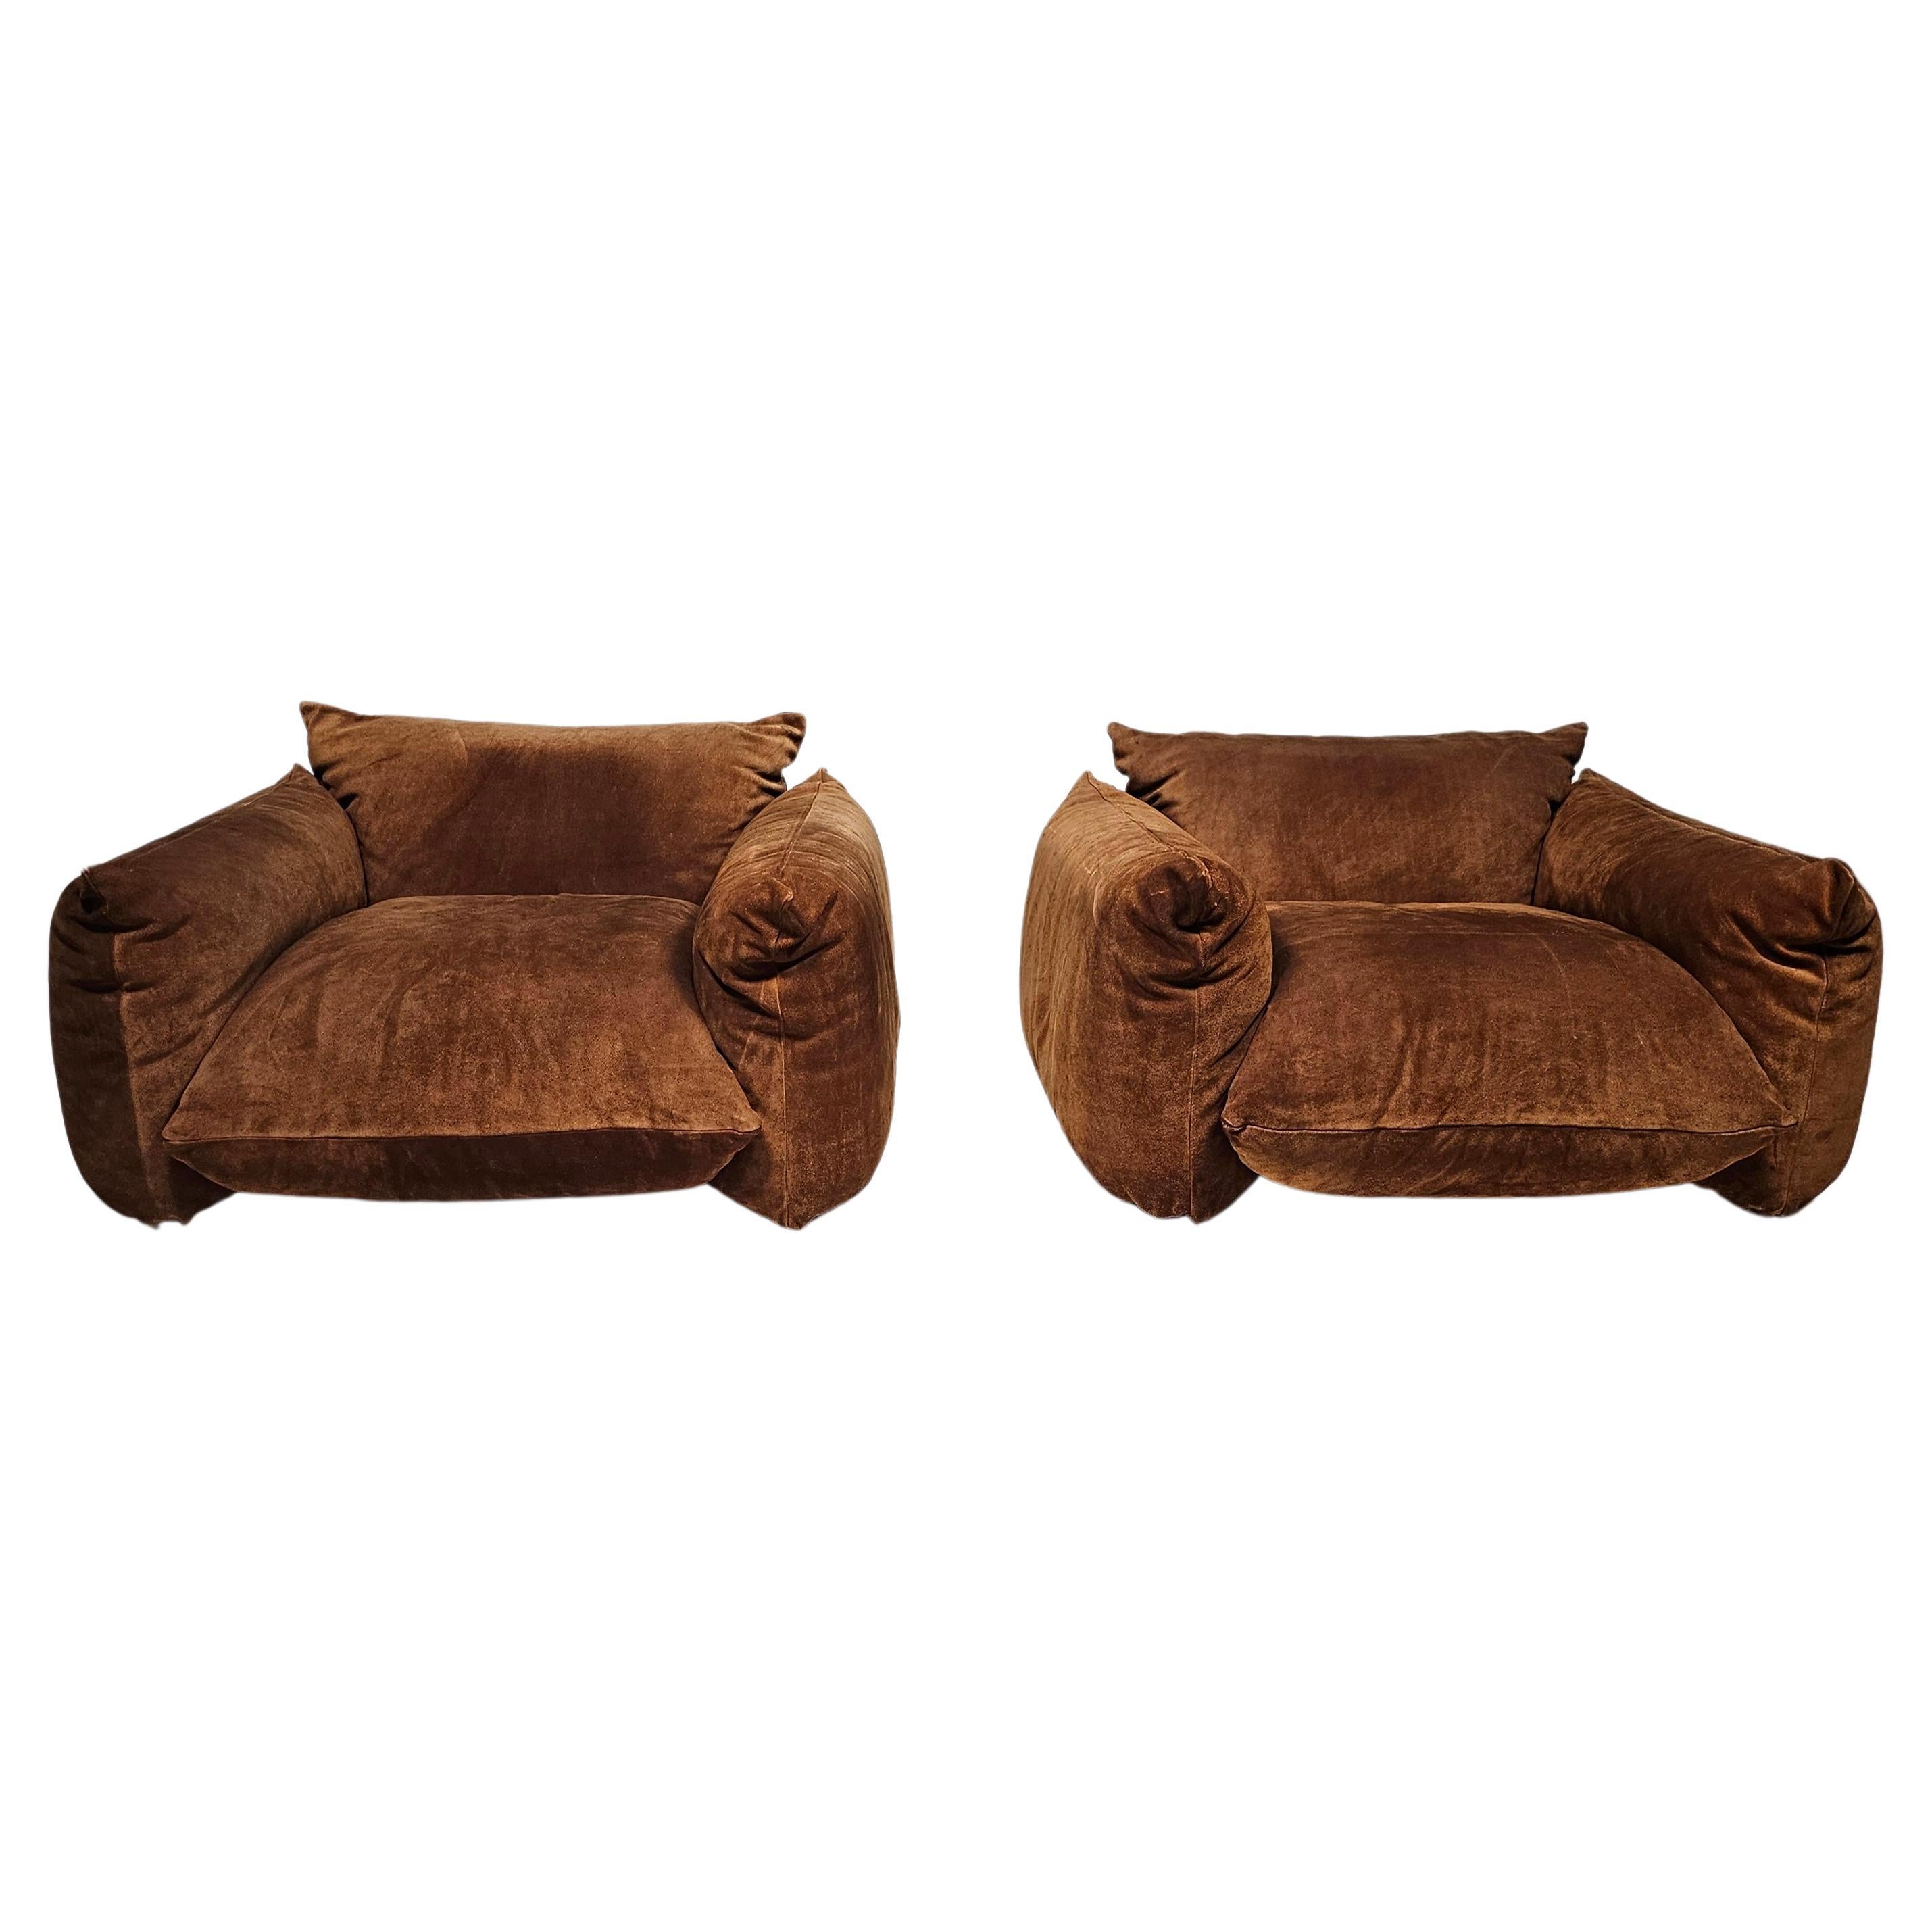 Mid-Century Modern First Edition Mario Marenco lounge chairs in light brown suede, Arflex, 1970s